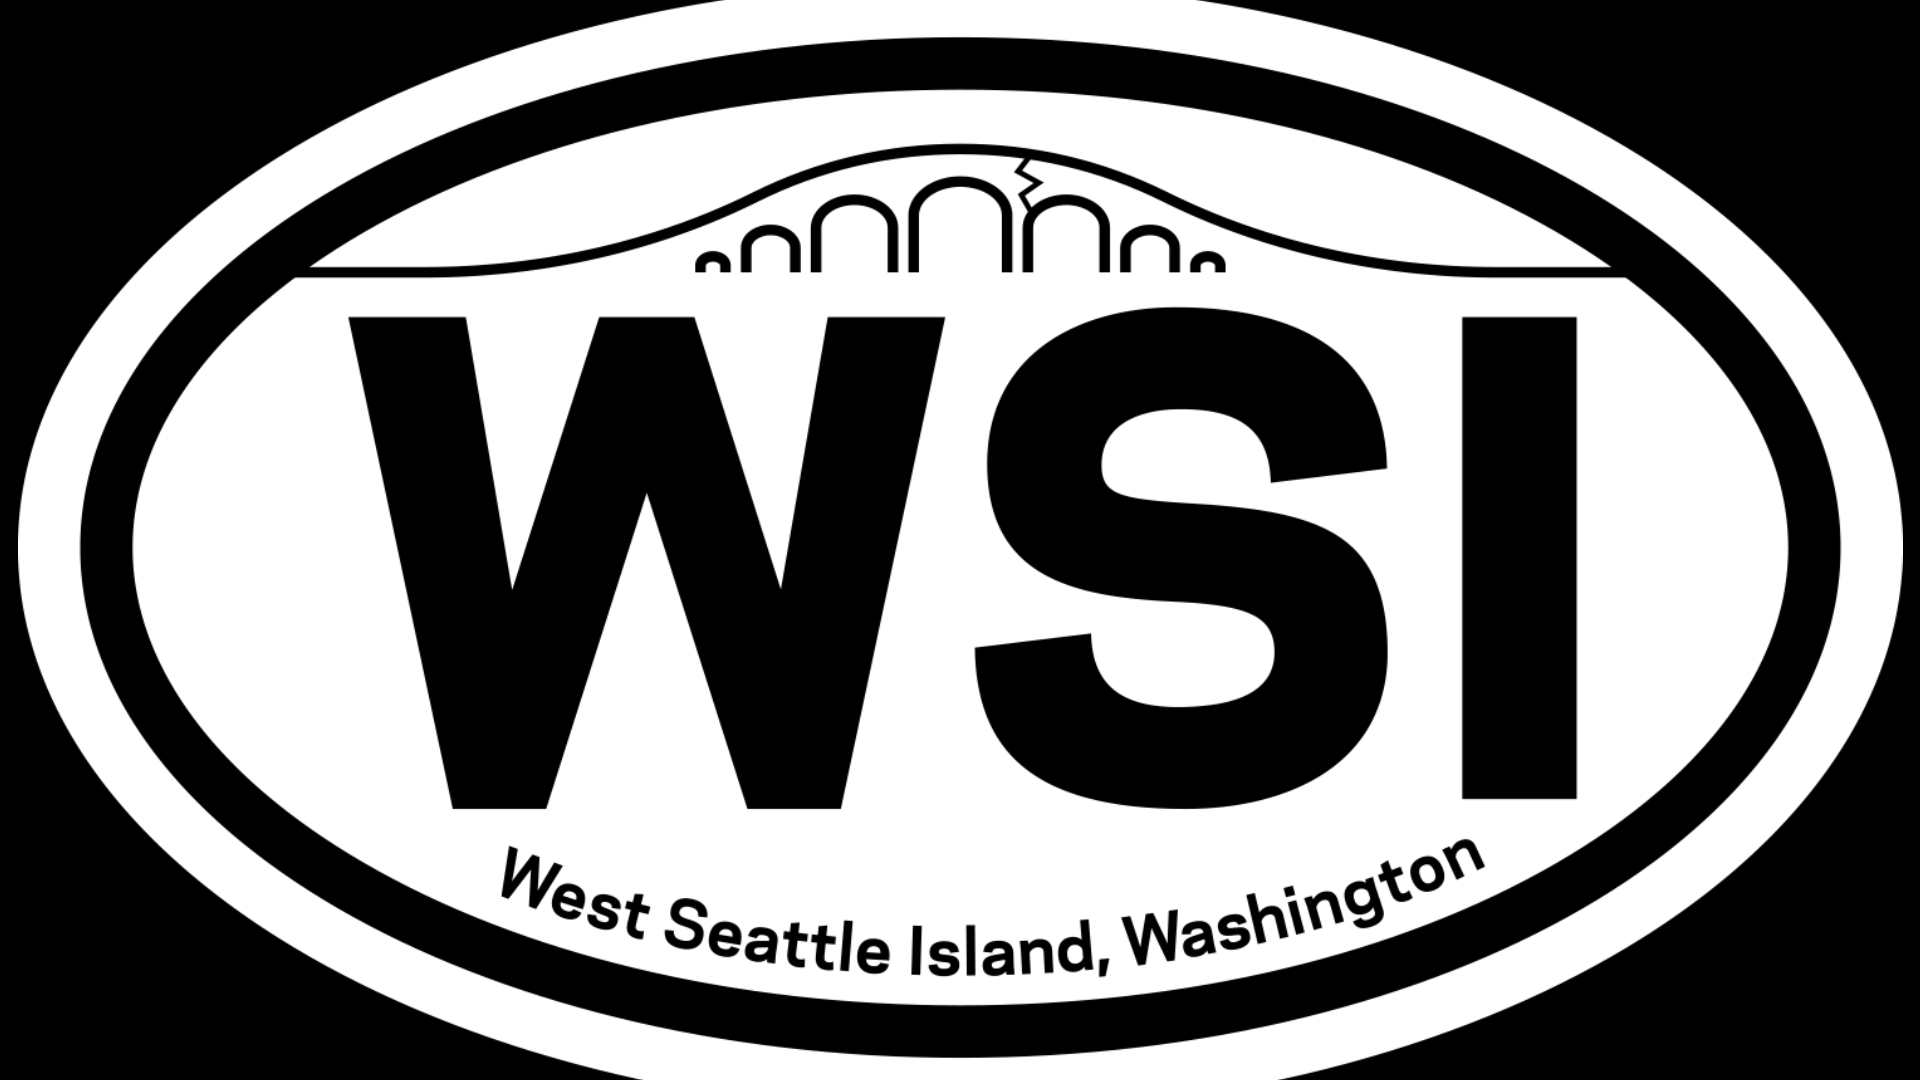 These West Seattle Island stickers are a funny way to show your West Seattle spirit- and give back to the community! #k5evening